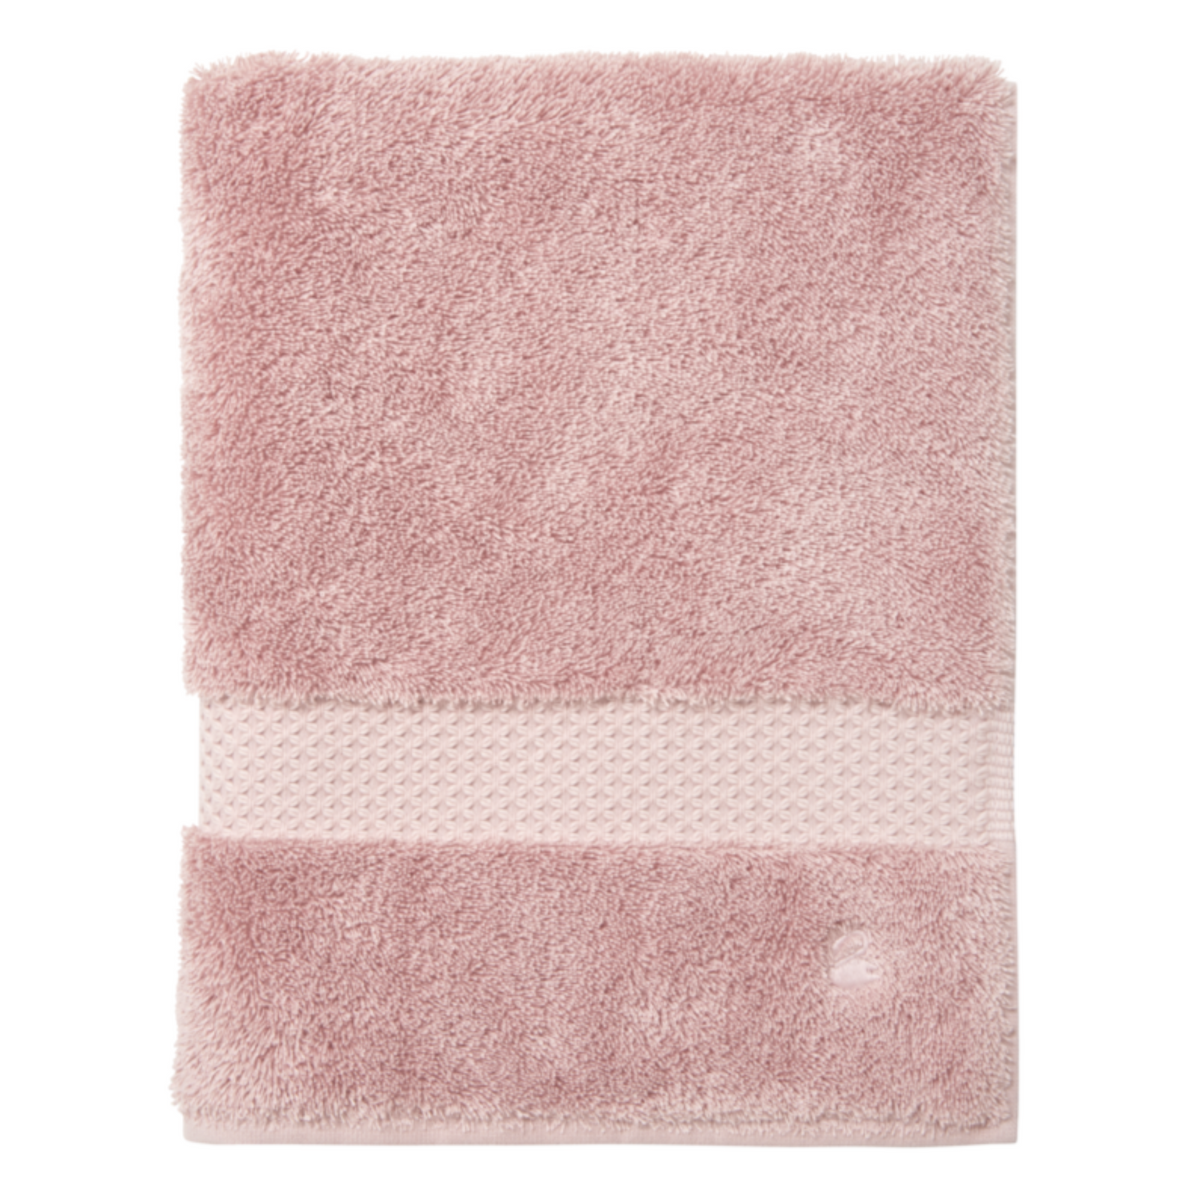 Folded Washcloth of Yves Delorme Etoile Bath Collection in The Rose Color